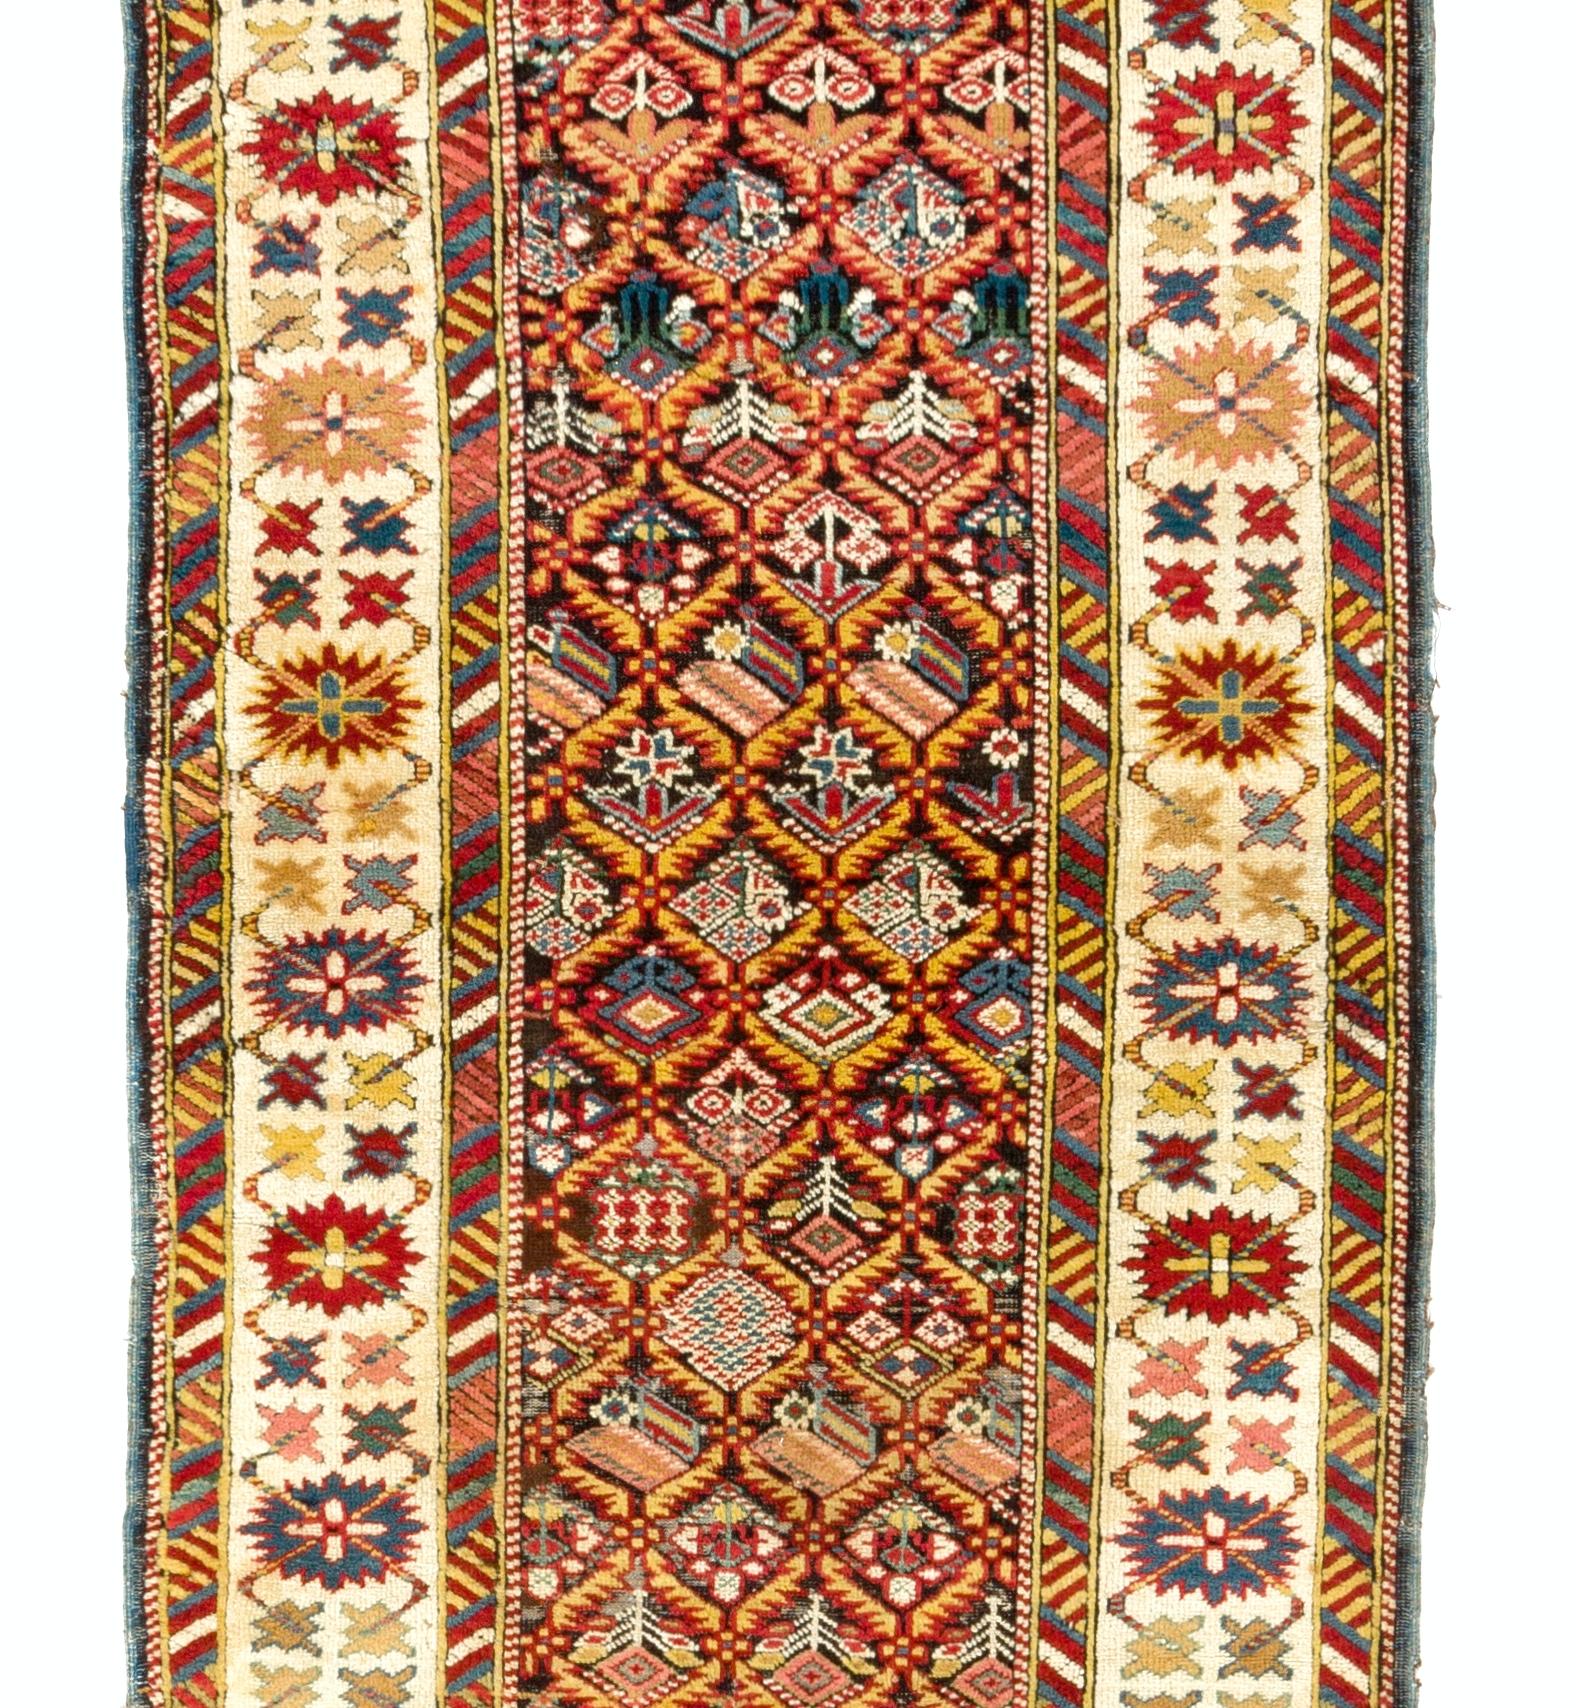 Tribal 3x11 Ft Antique Caucasian Kuba Runner Rug. Excellent Condition. 19th Century For Sale